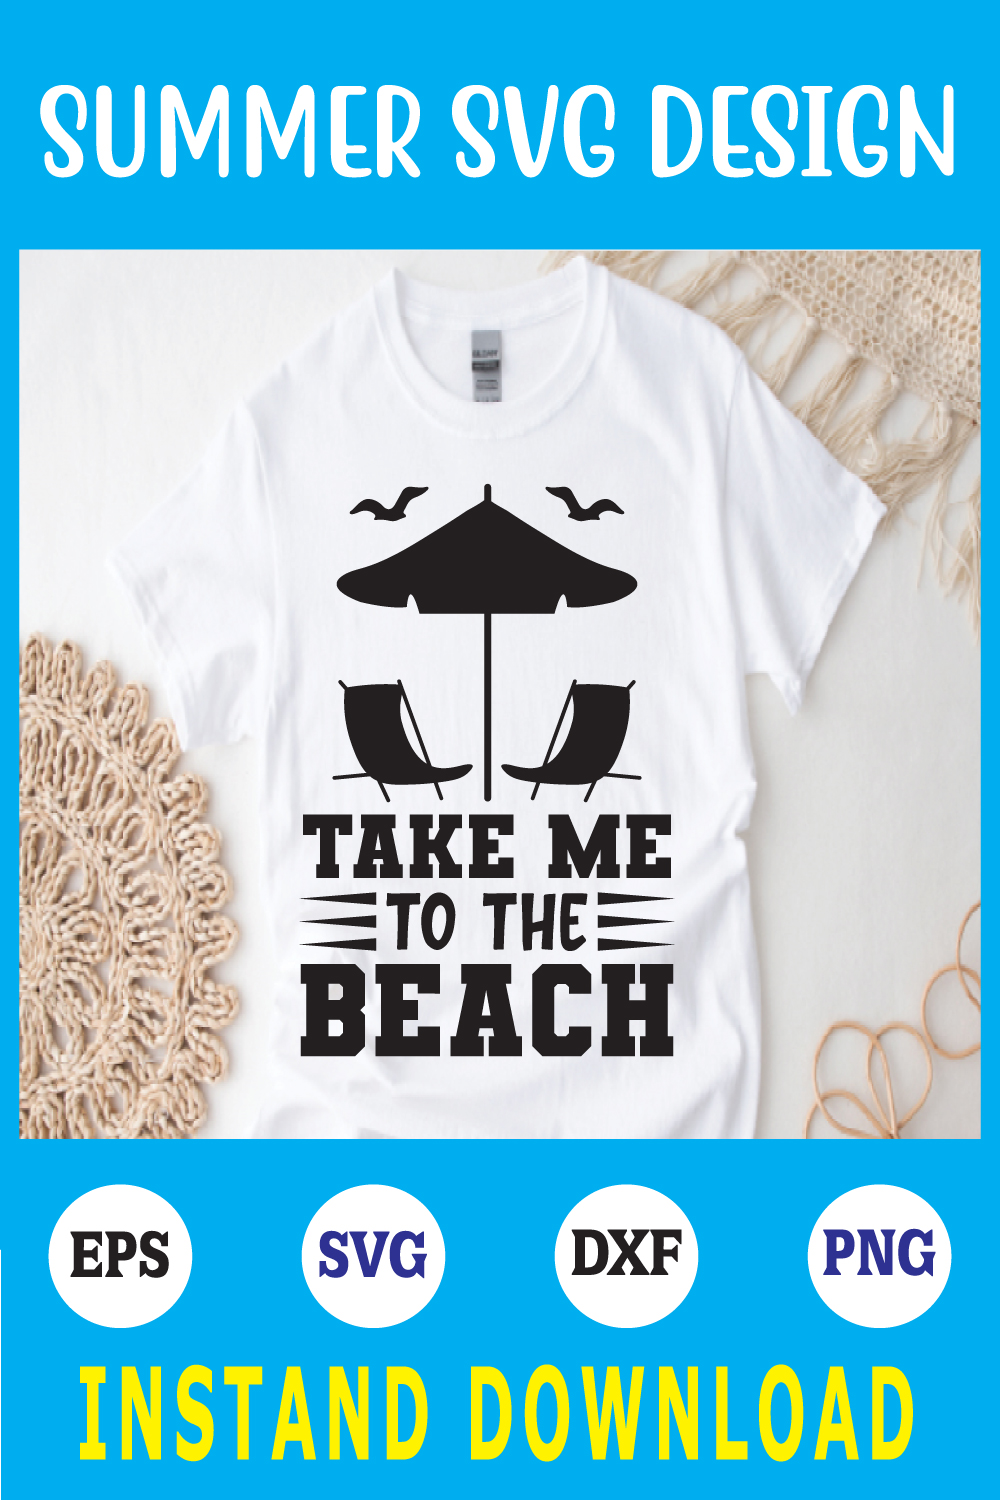 take me to the beach svg pinterest preview image.